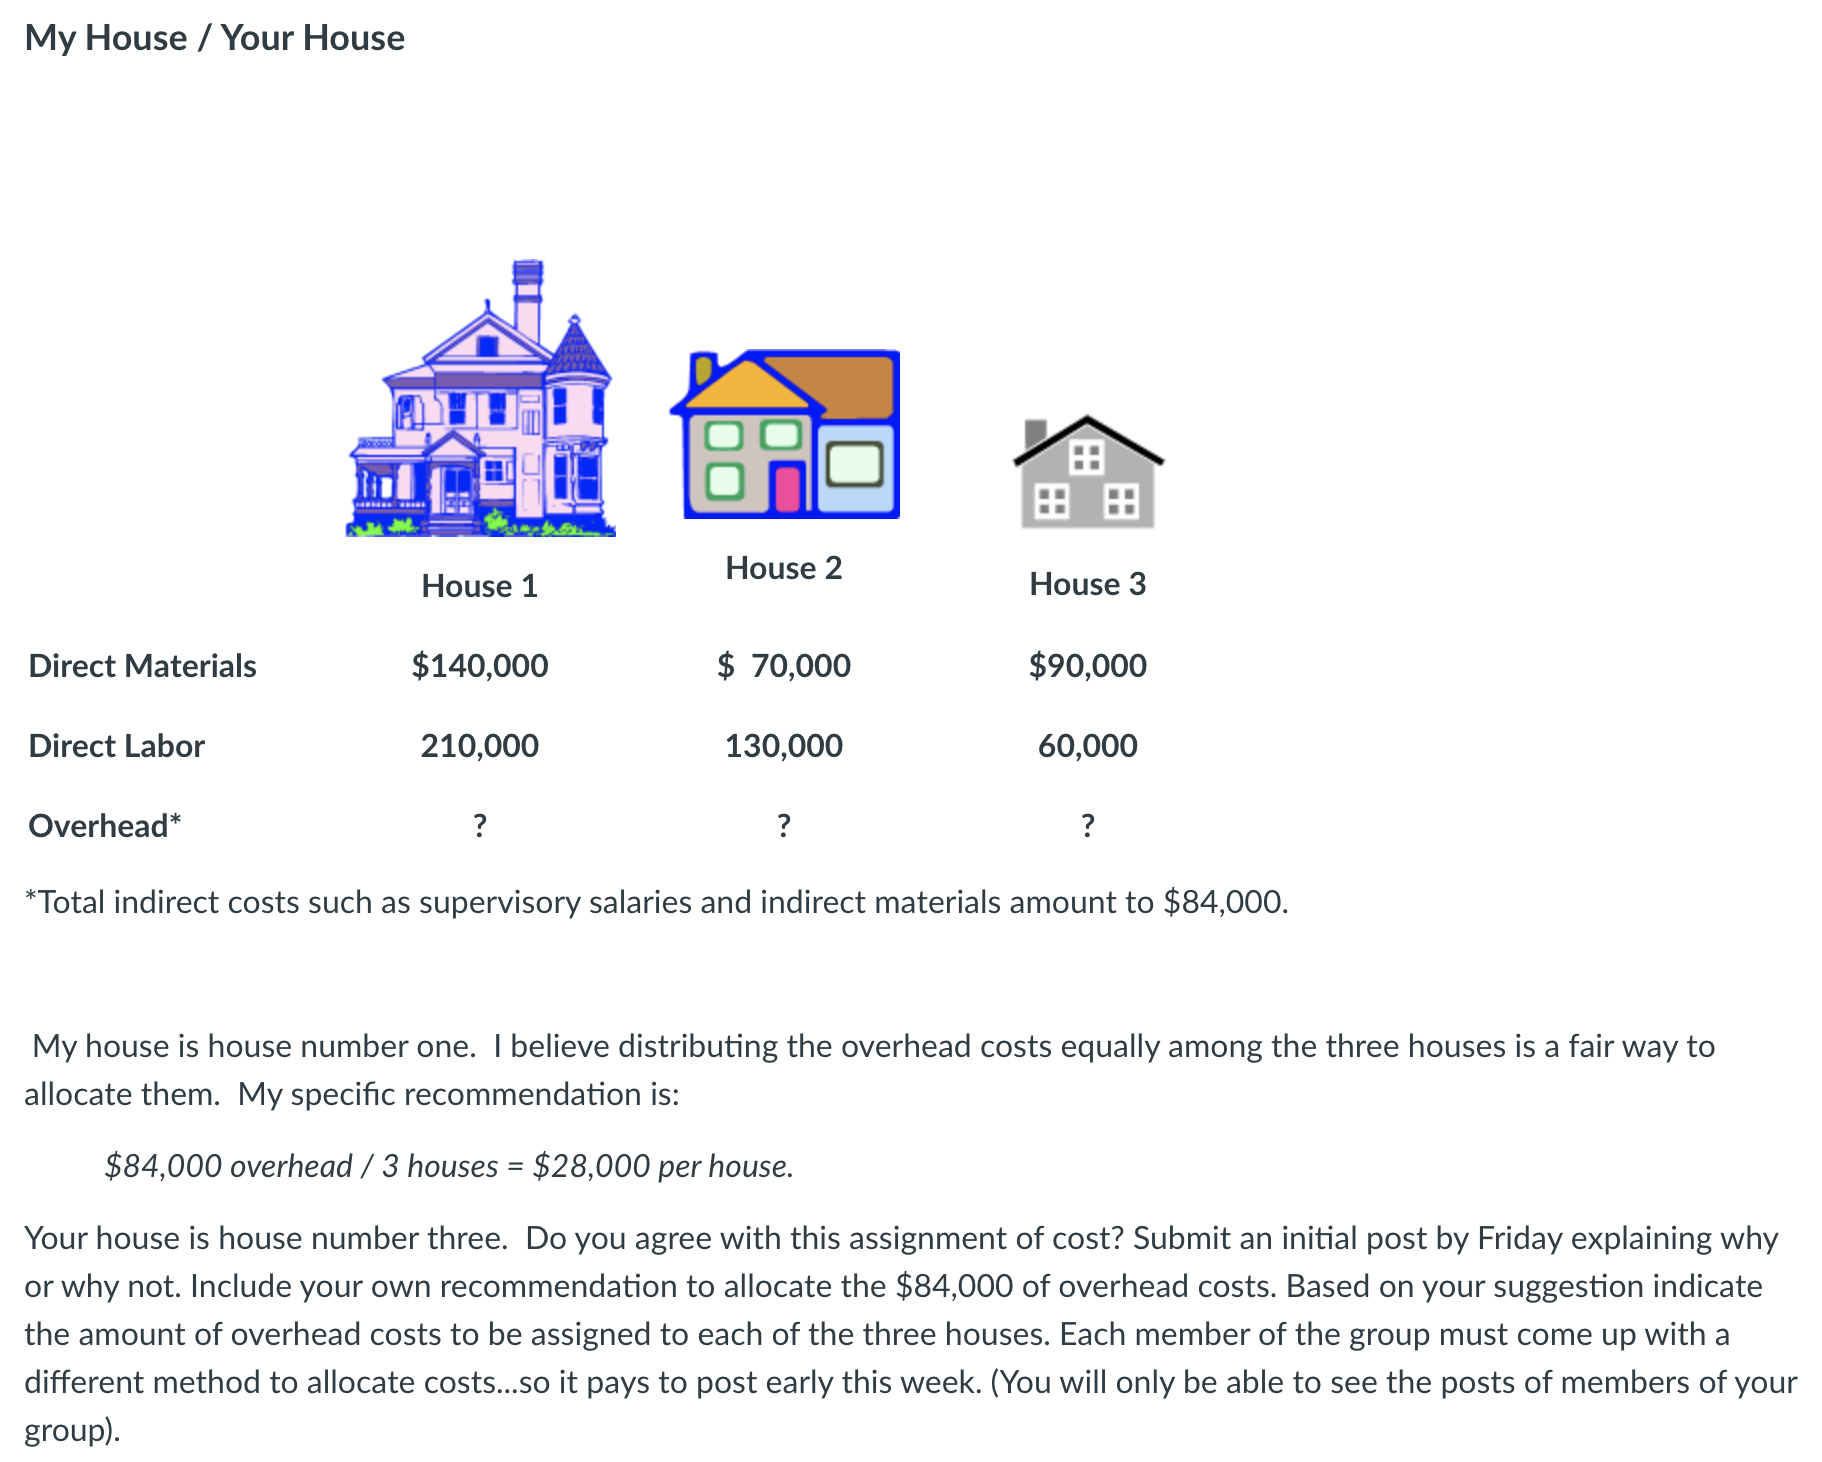 My House / Your House Direct Materials Direct Labor Overhead* as House 1 $140,000 210,000 ? House 2 $70,000